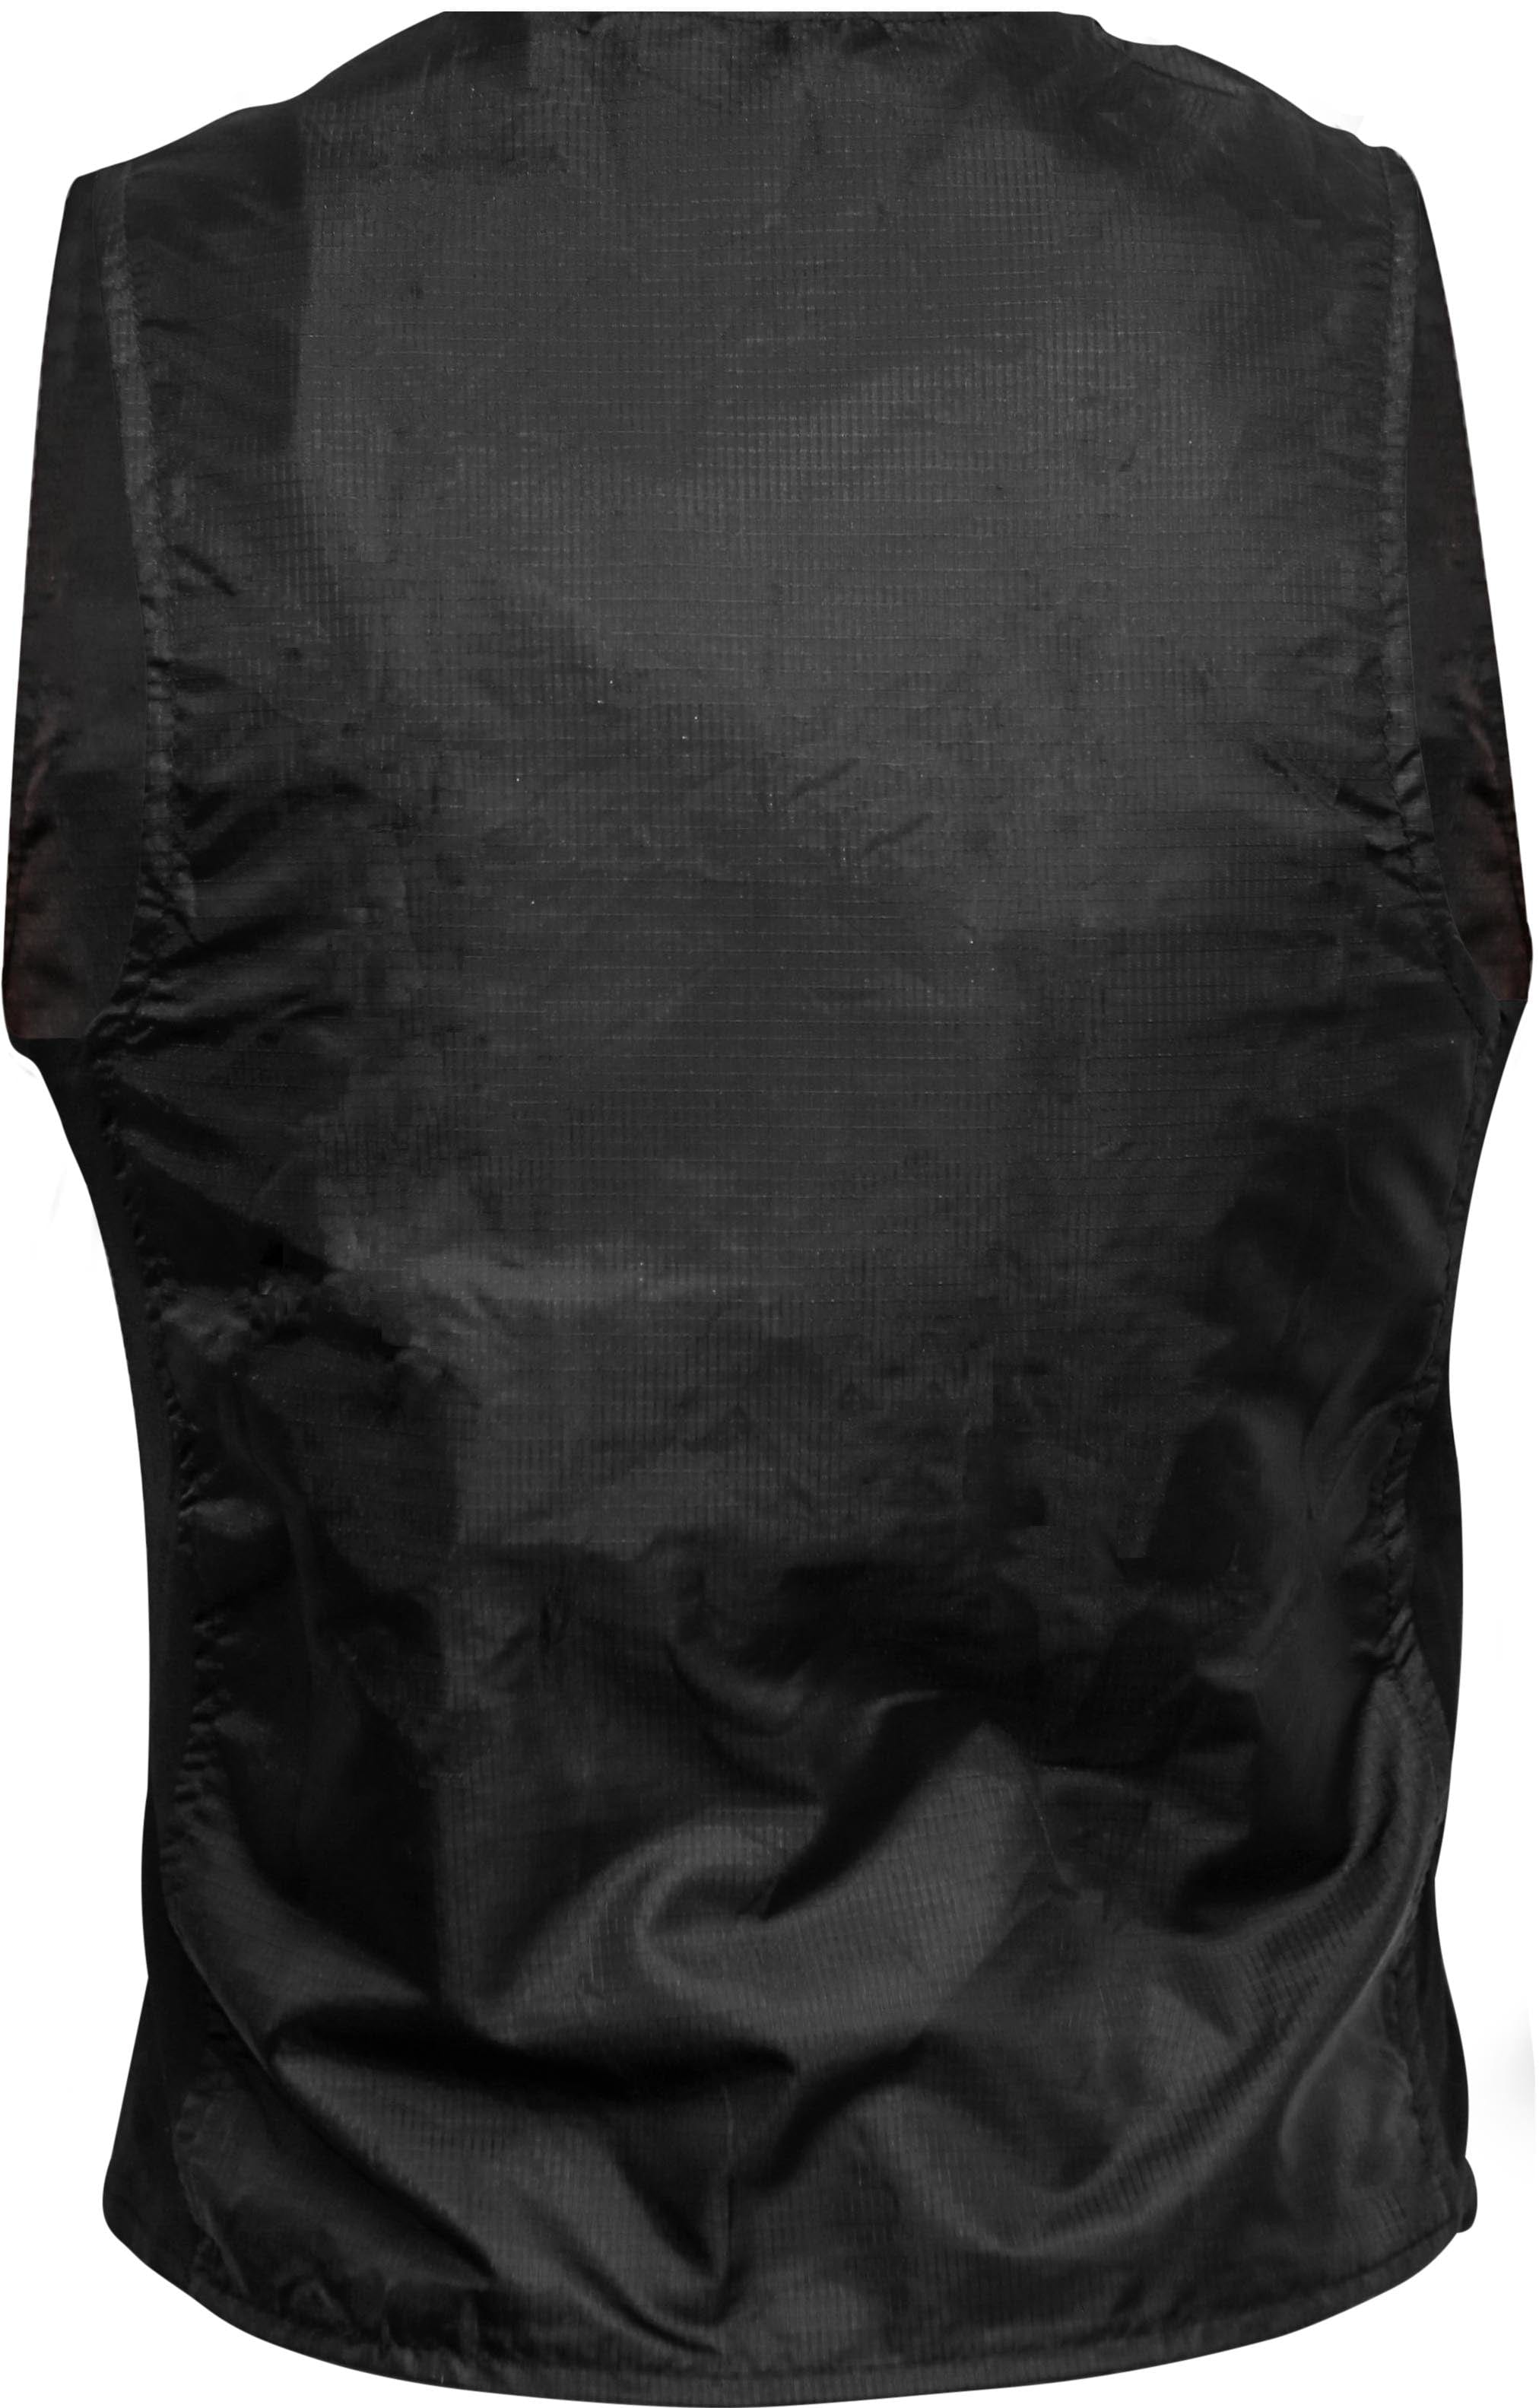 Western Powersports Vest 7V Lithium-Ion Battery Vest by California Heat